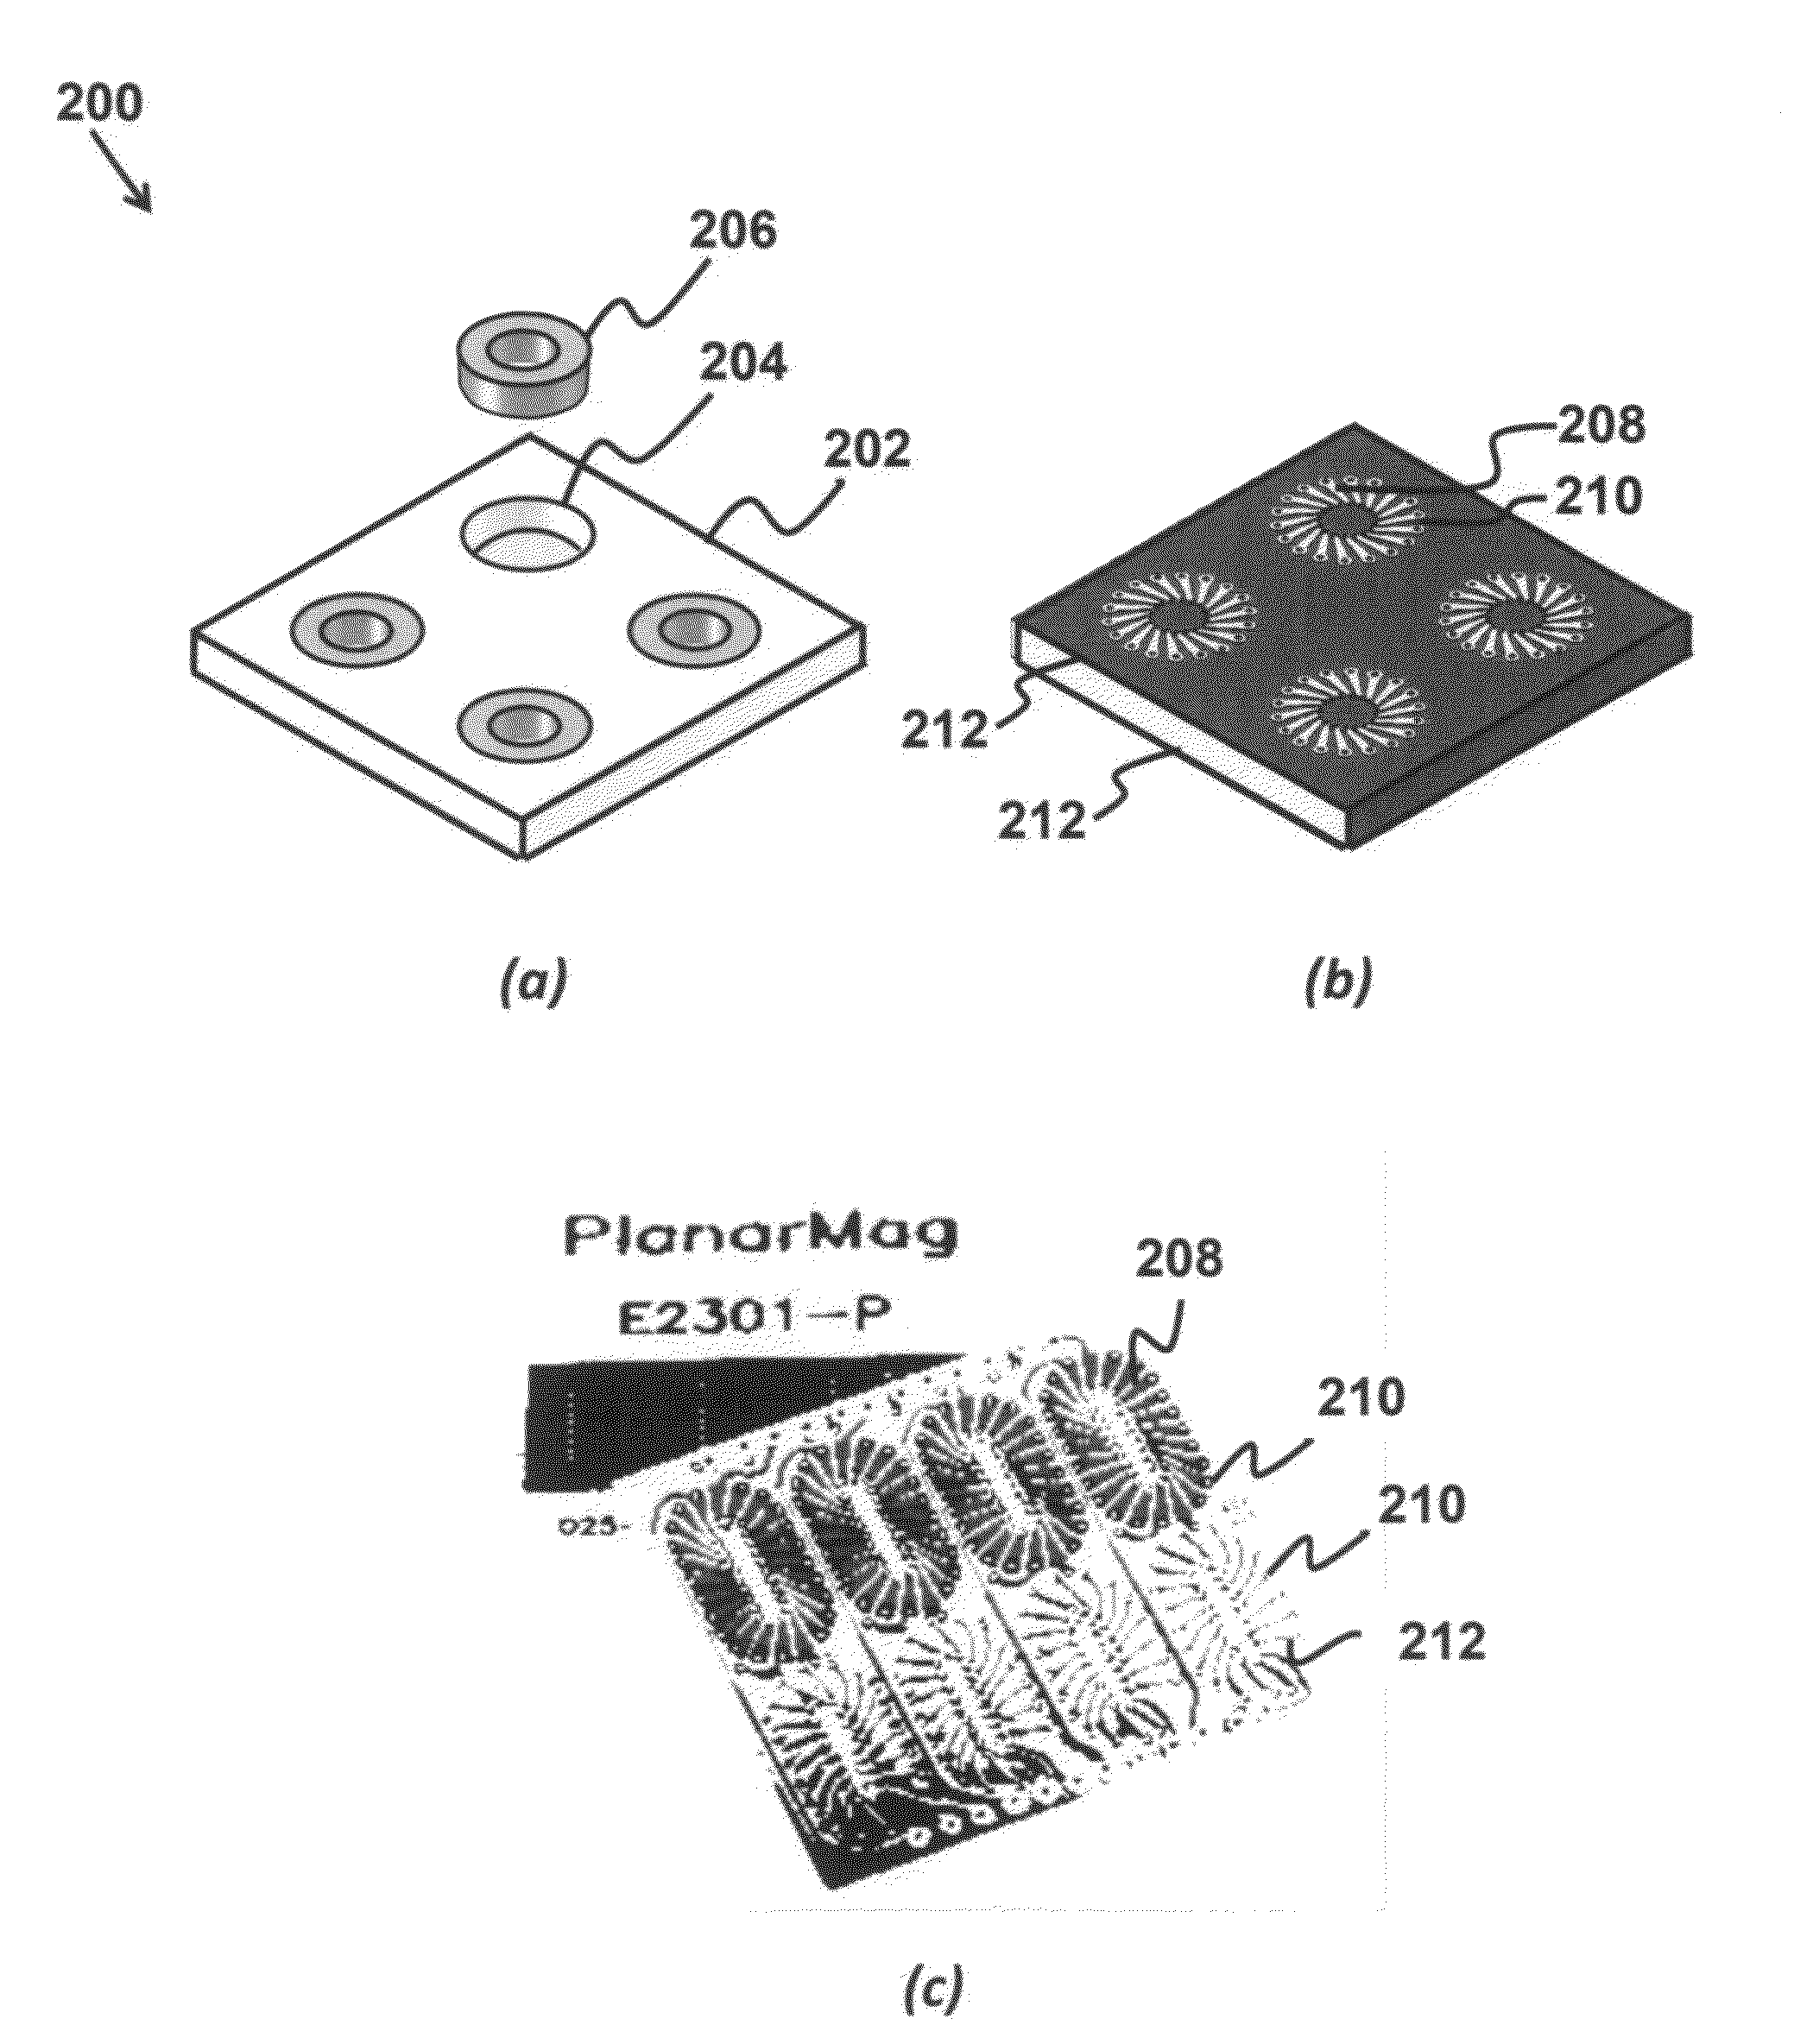 Manufacture and use of planar embedded magnetics as discrete components and in integrated connectors